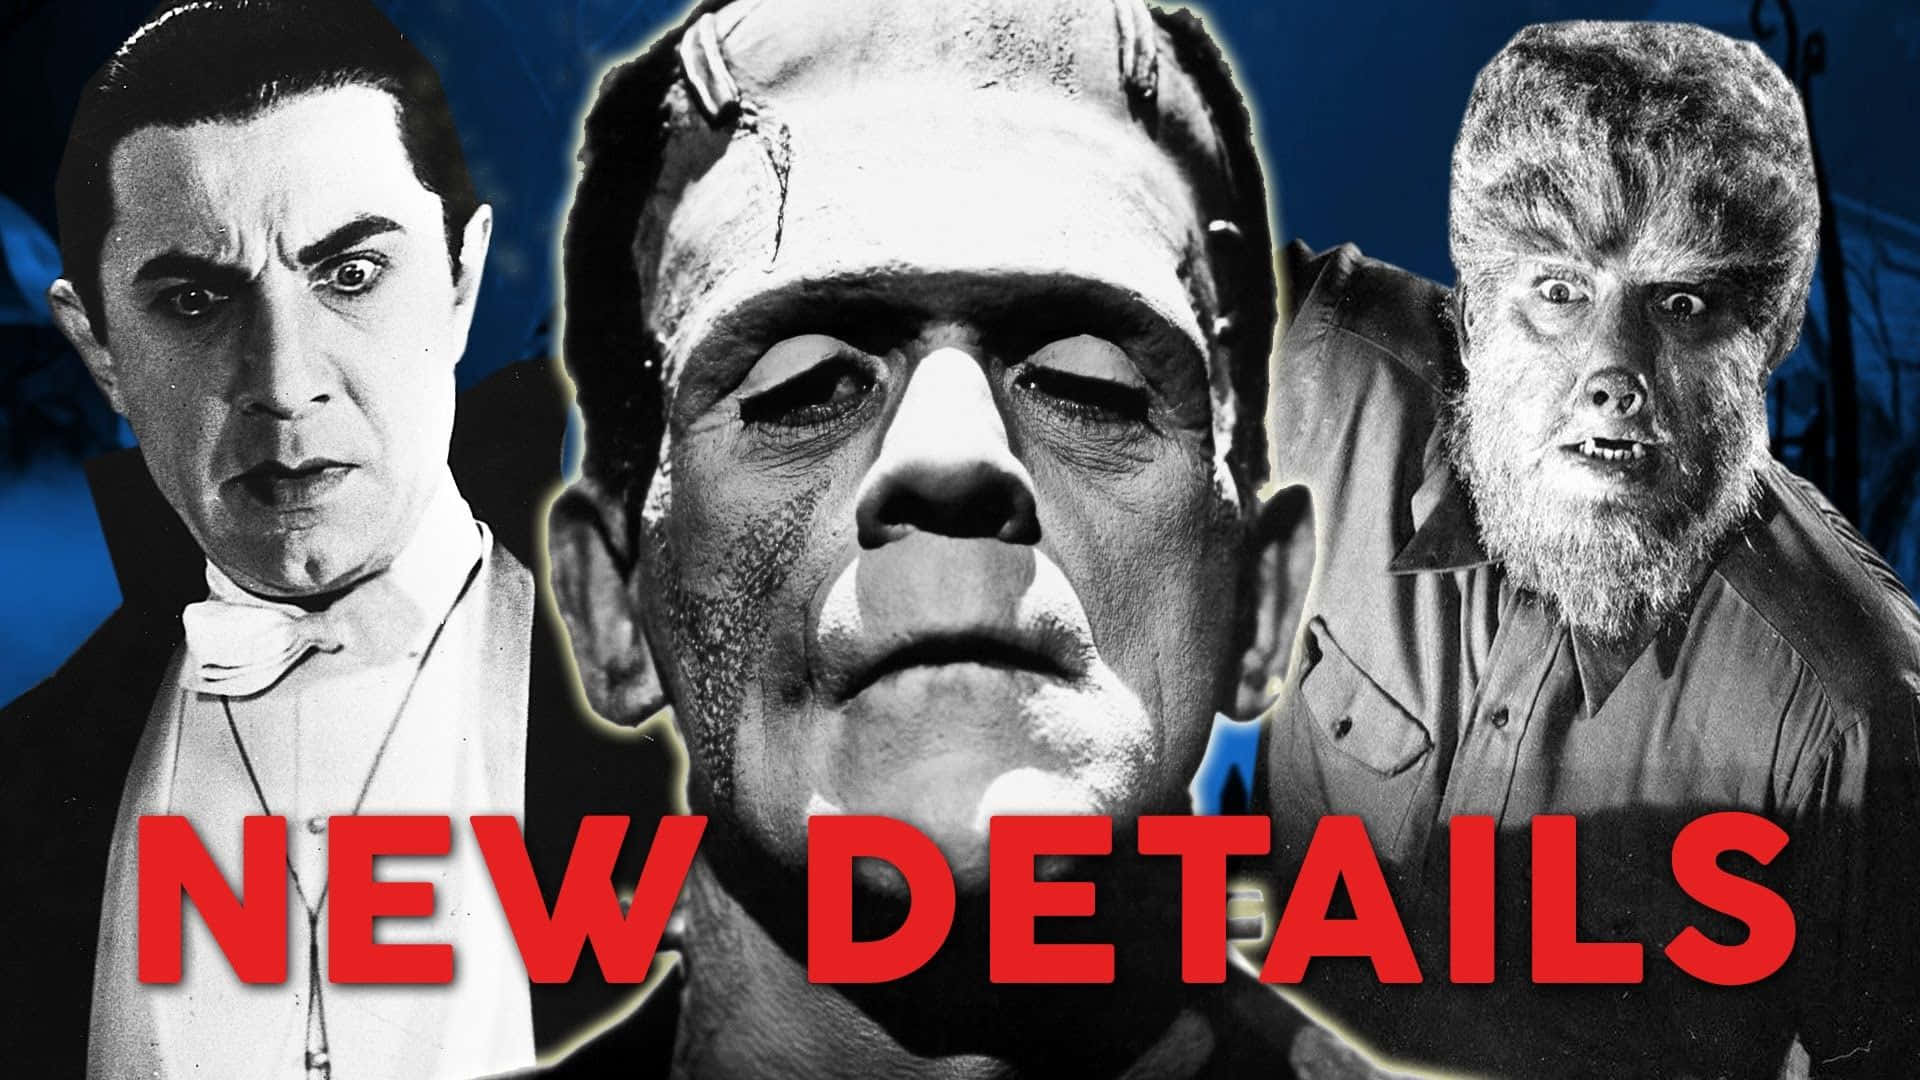 Follow In The Footsteps Of The Universal Monsters